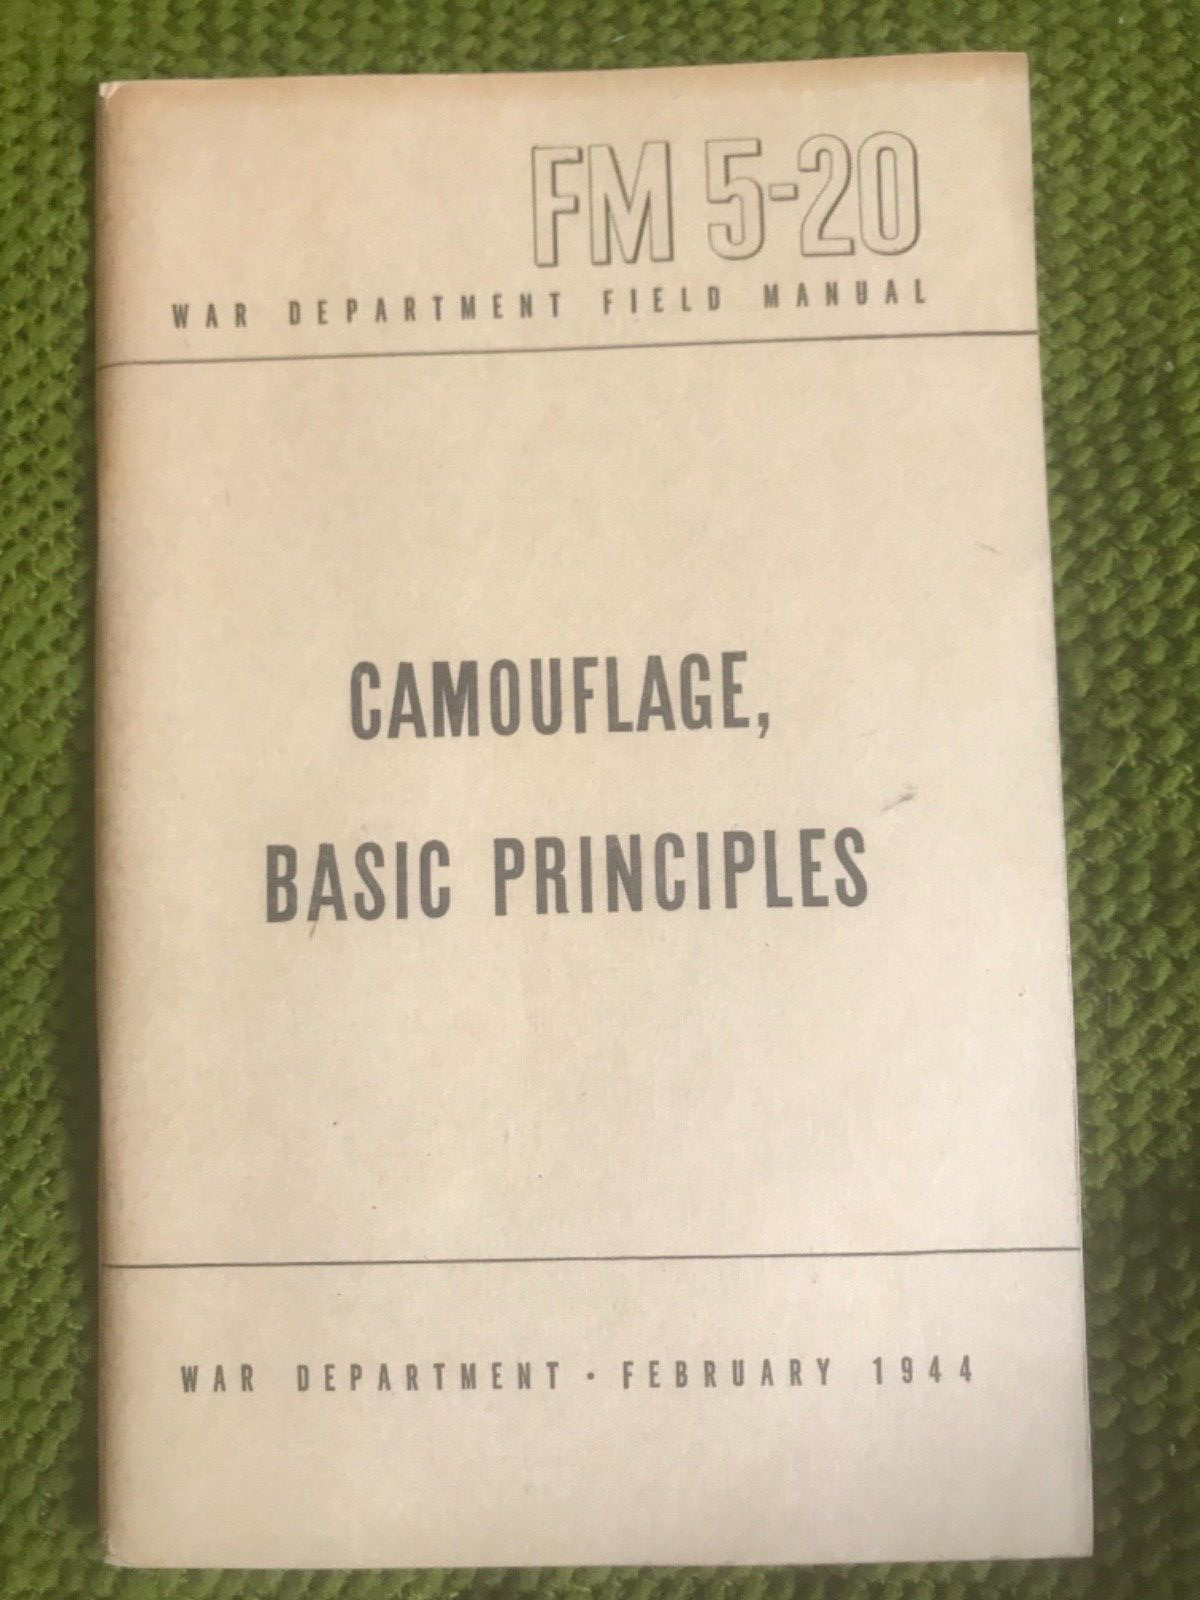 World War II Camouflage Basic Principles - US Army War Department Text